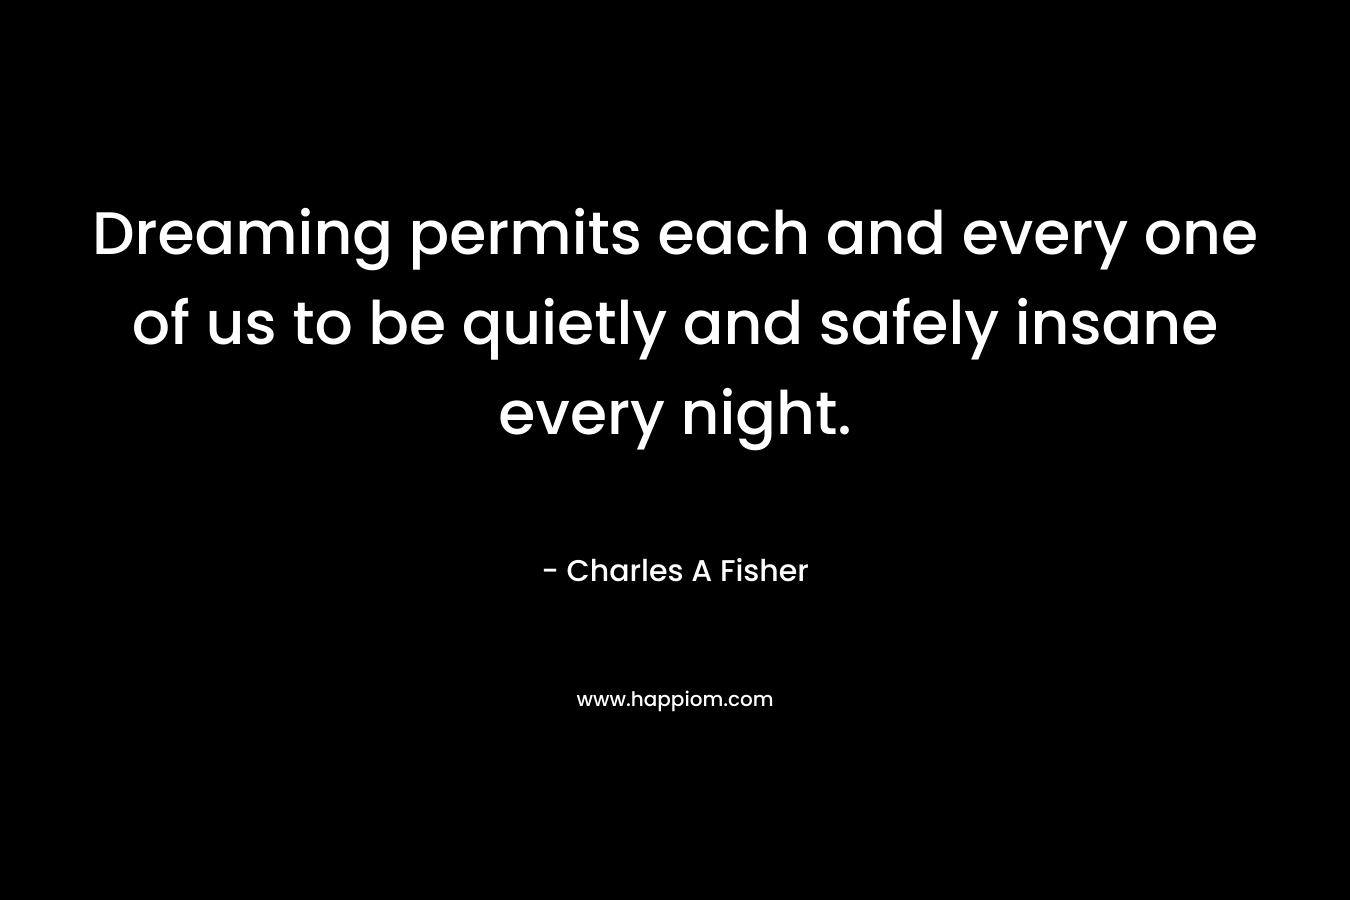 Dreaming permits each and every one of us to be quietly and safely insane every night. – Charles A Fisher